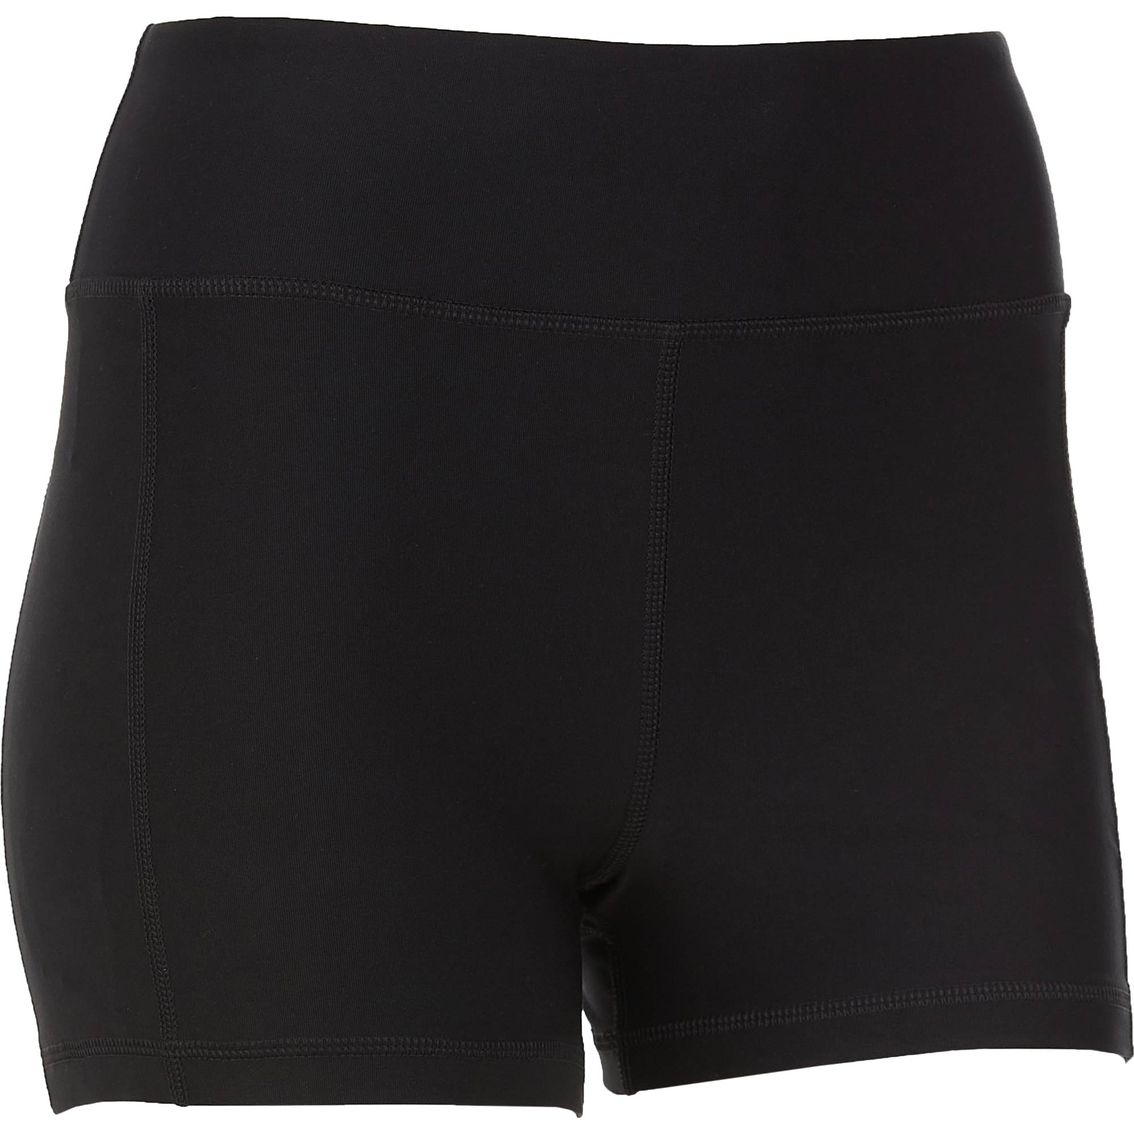 Pbx Pro Volleyball Shorts | Pants | Clothing & Accessories | Shop The ...